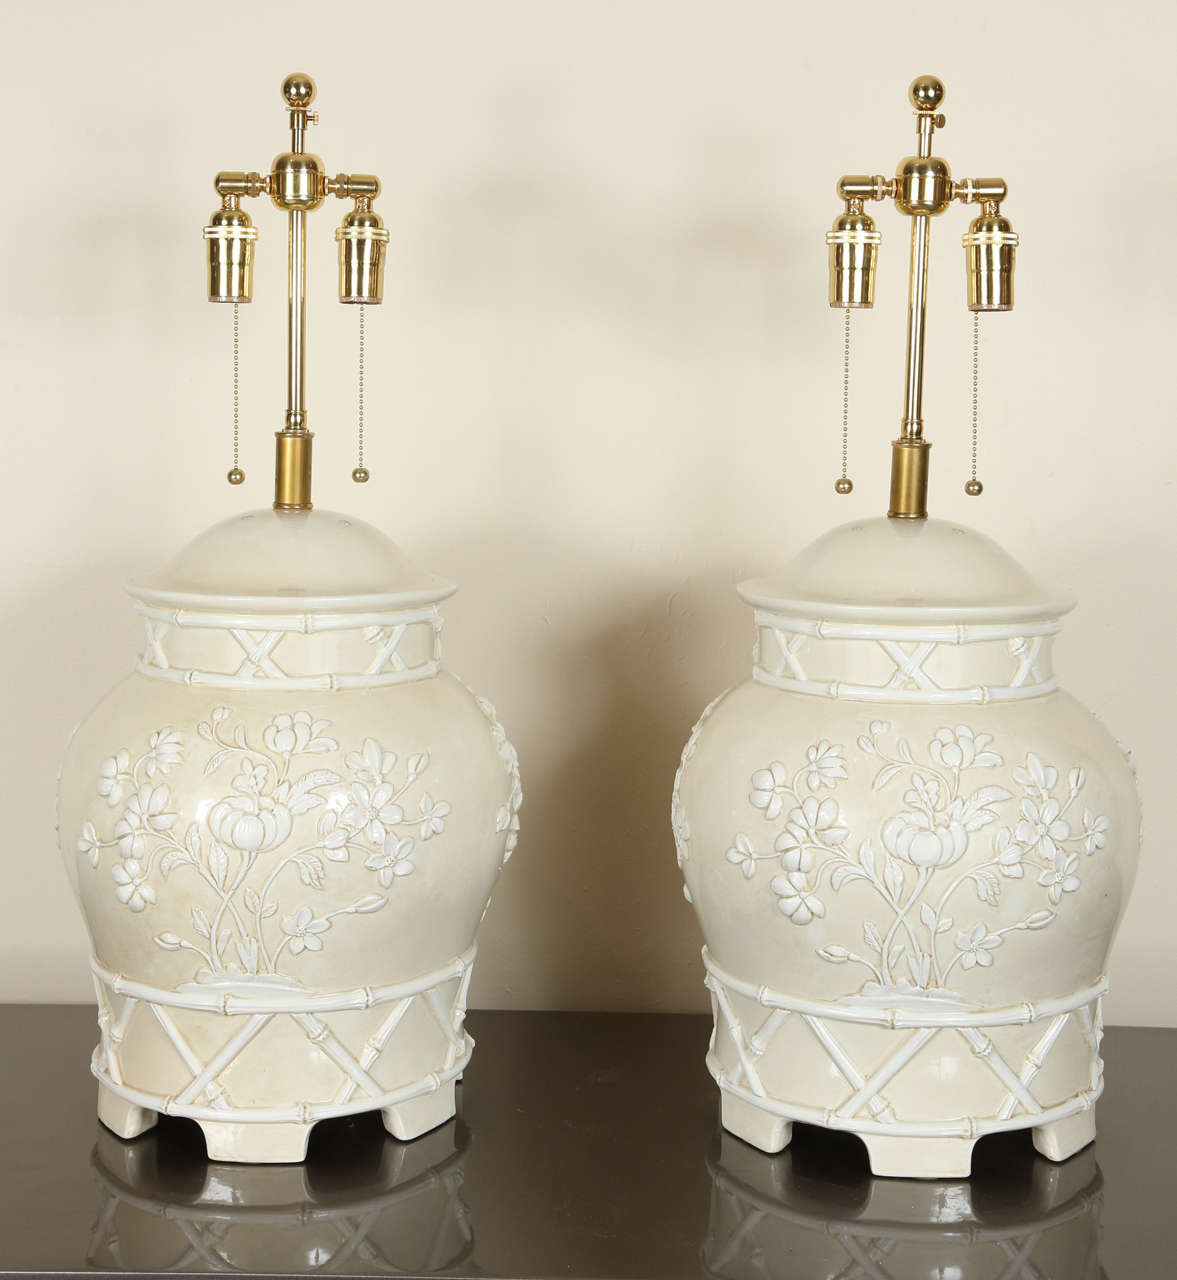 Pair of beautiful Italian ceramic table lamps.  They feature a bamboo basket work design and molded flowers.  They have a beige and white glaze. They are newly rewired and outfitted with brass double clusters.